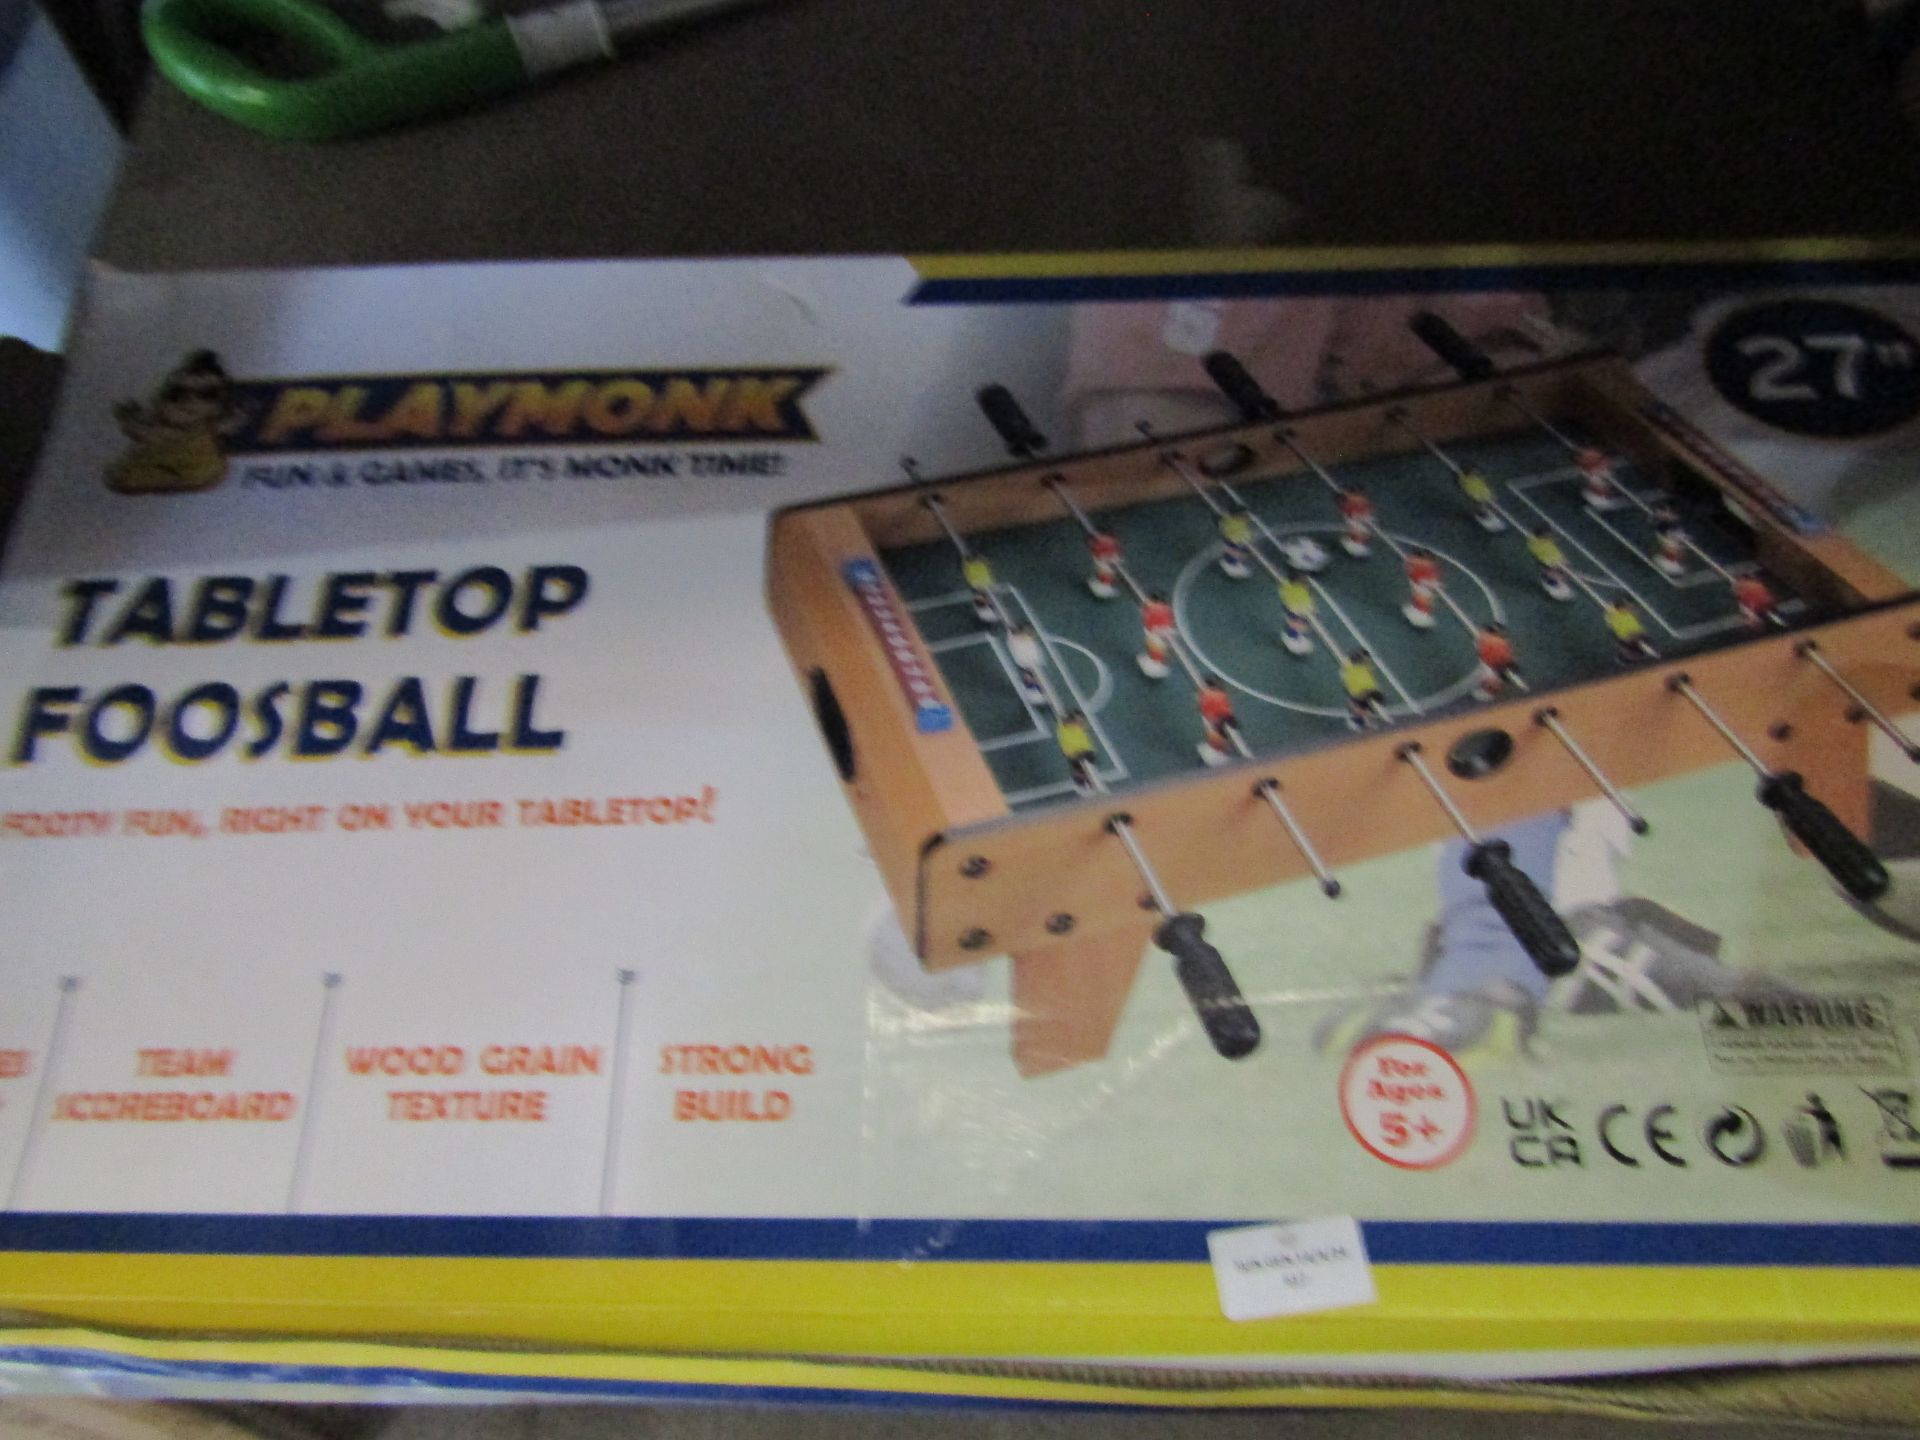 Playmonk Tabletop Foosball 27" - Unchecked & Boxed.